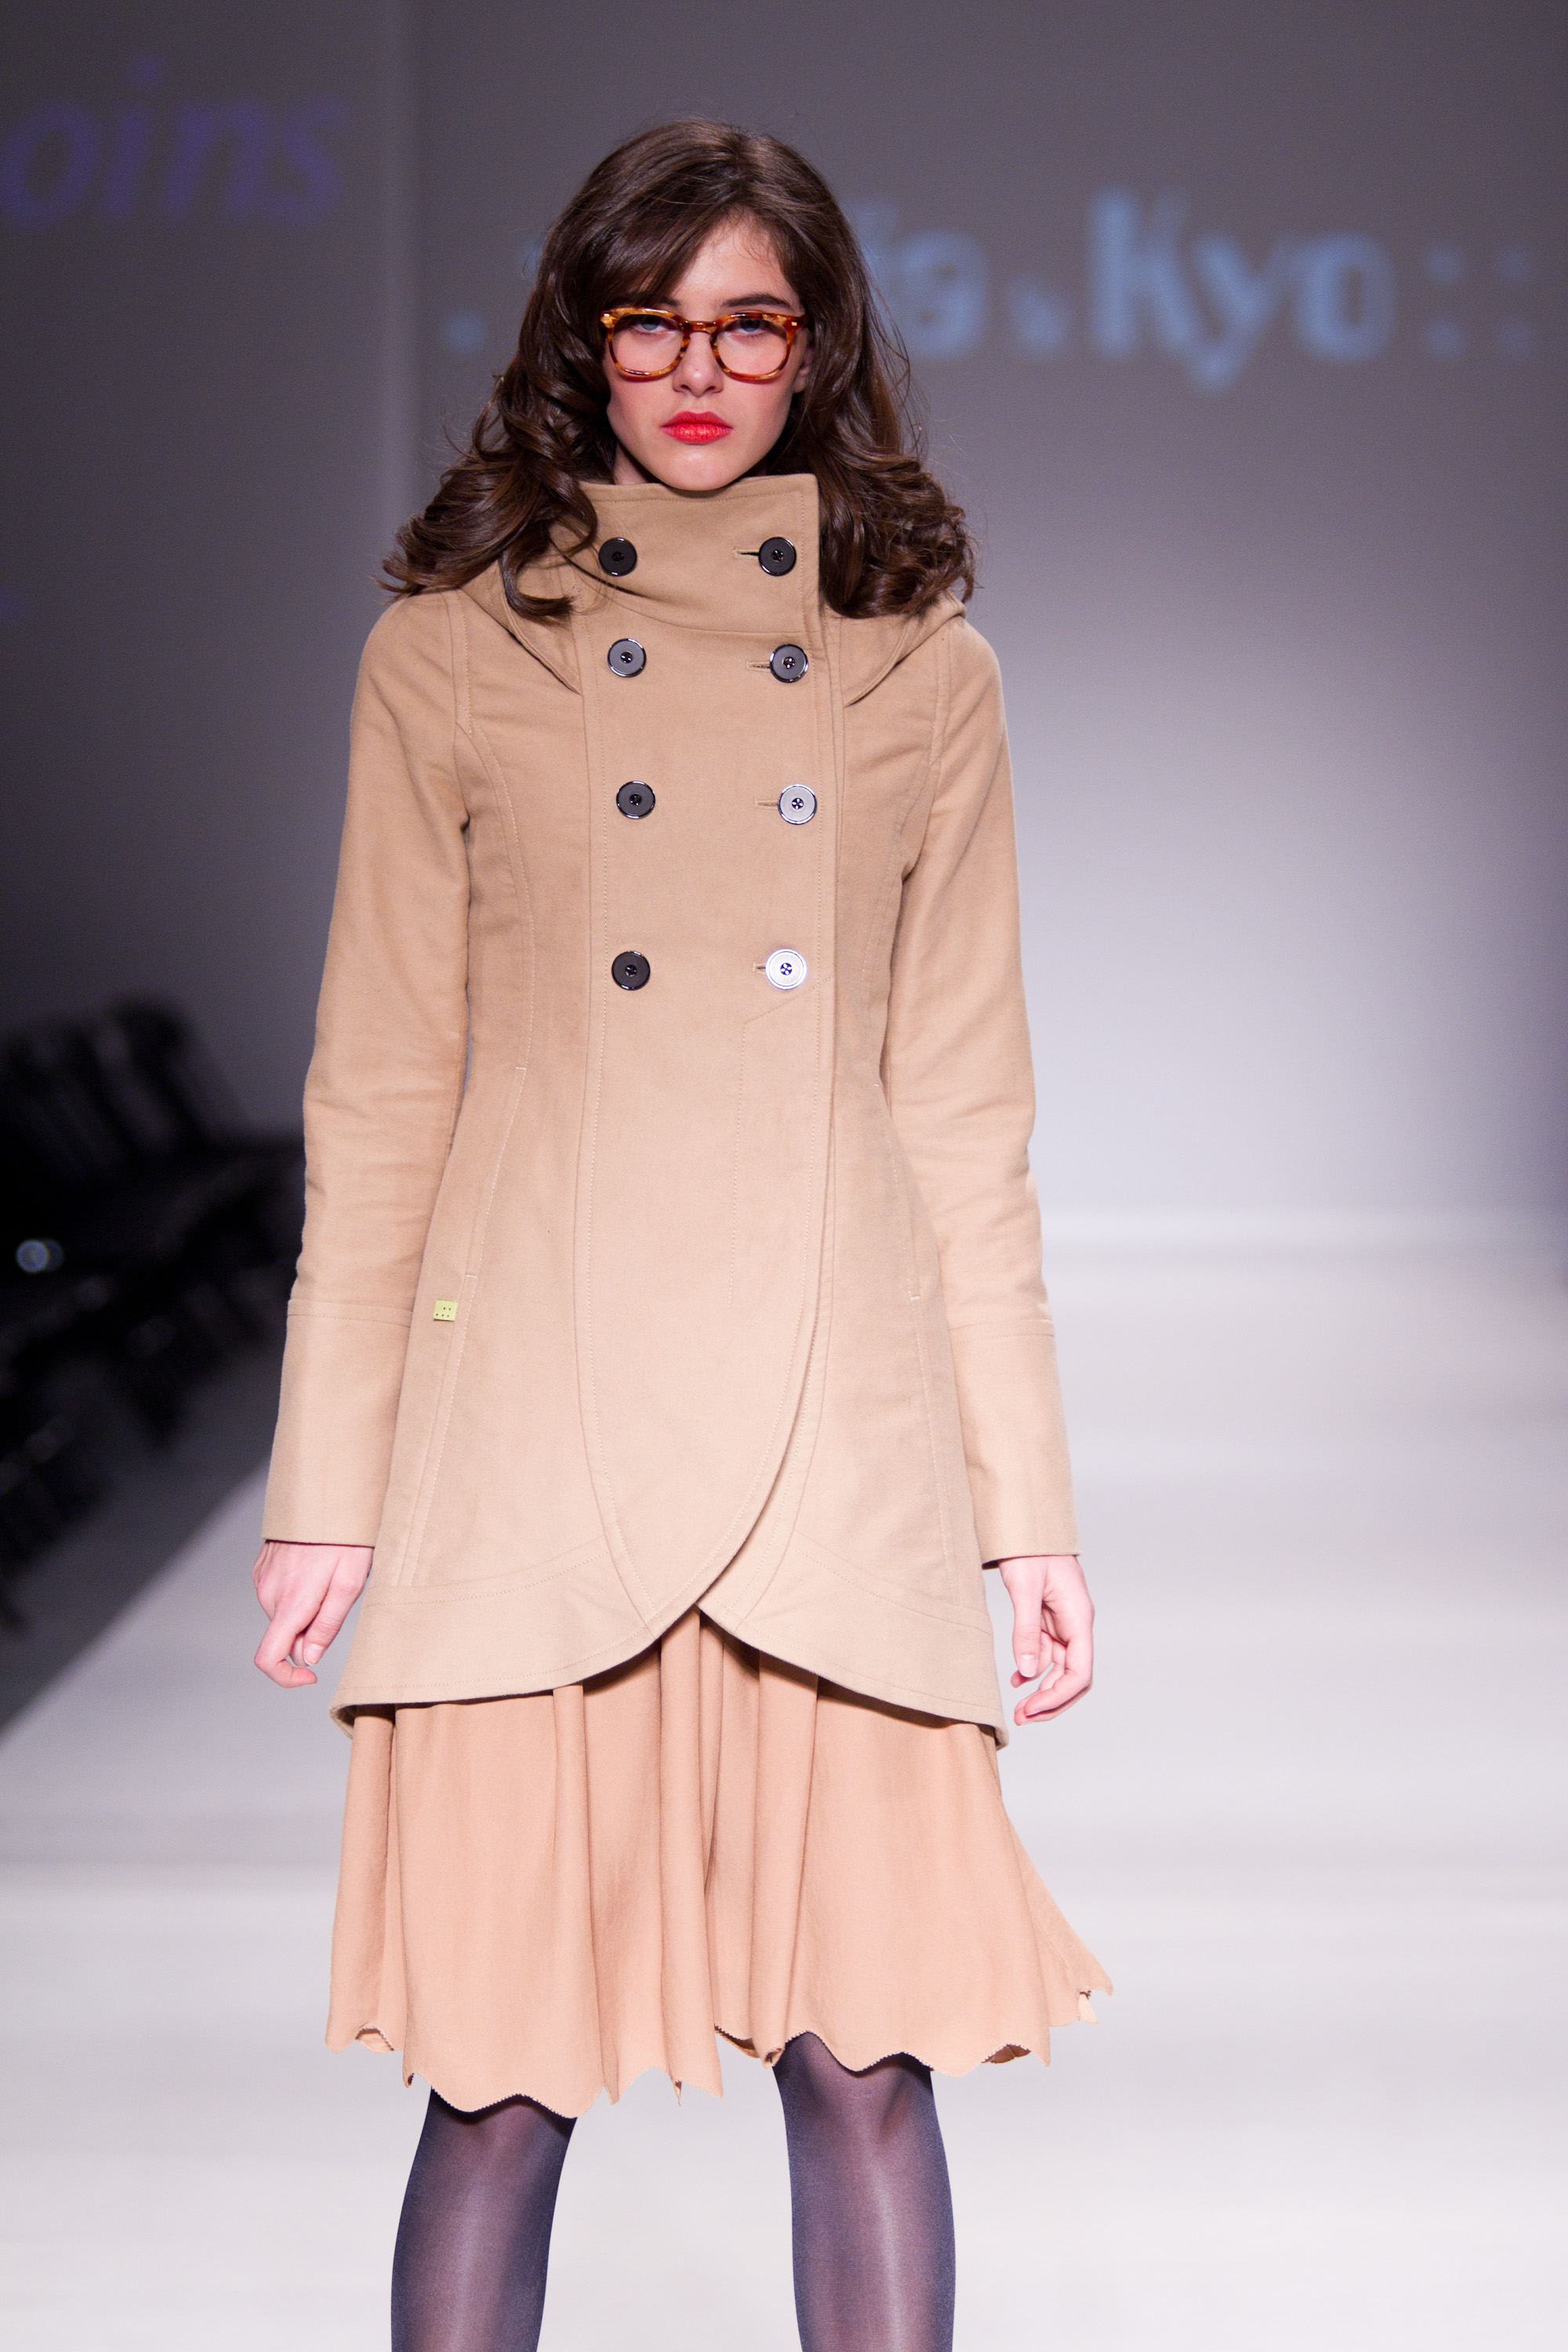 Montral Fashion Week Day 3: Soïa & Kyo Fall-Winter 2011 collection